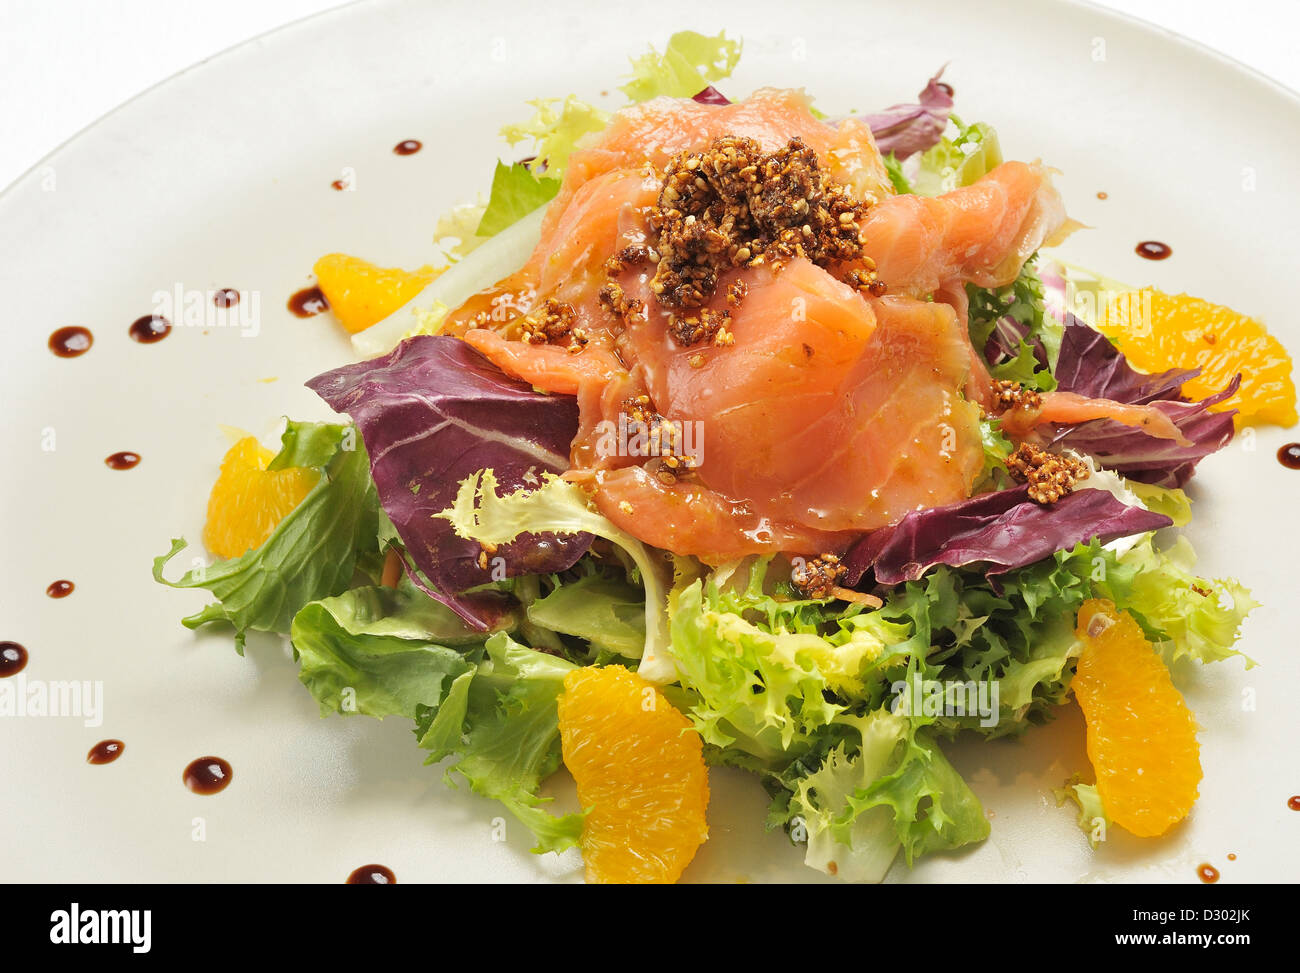 salmon salad with lettuce and escarole with tangerine segments Stock Photo